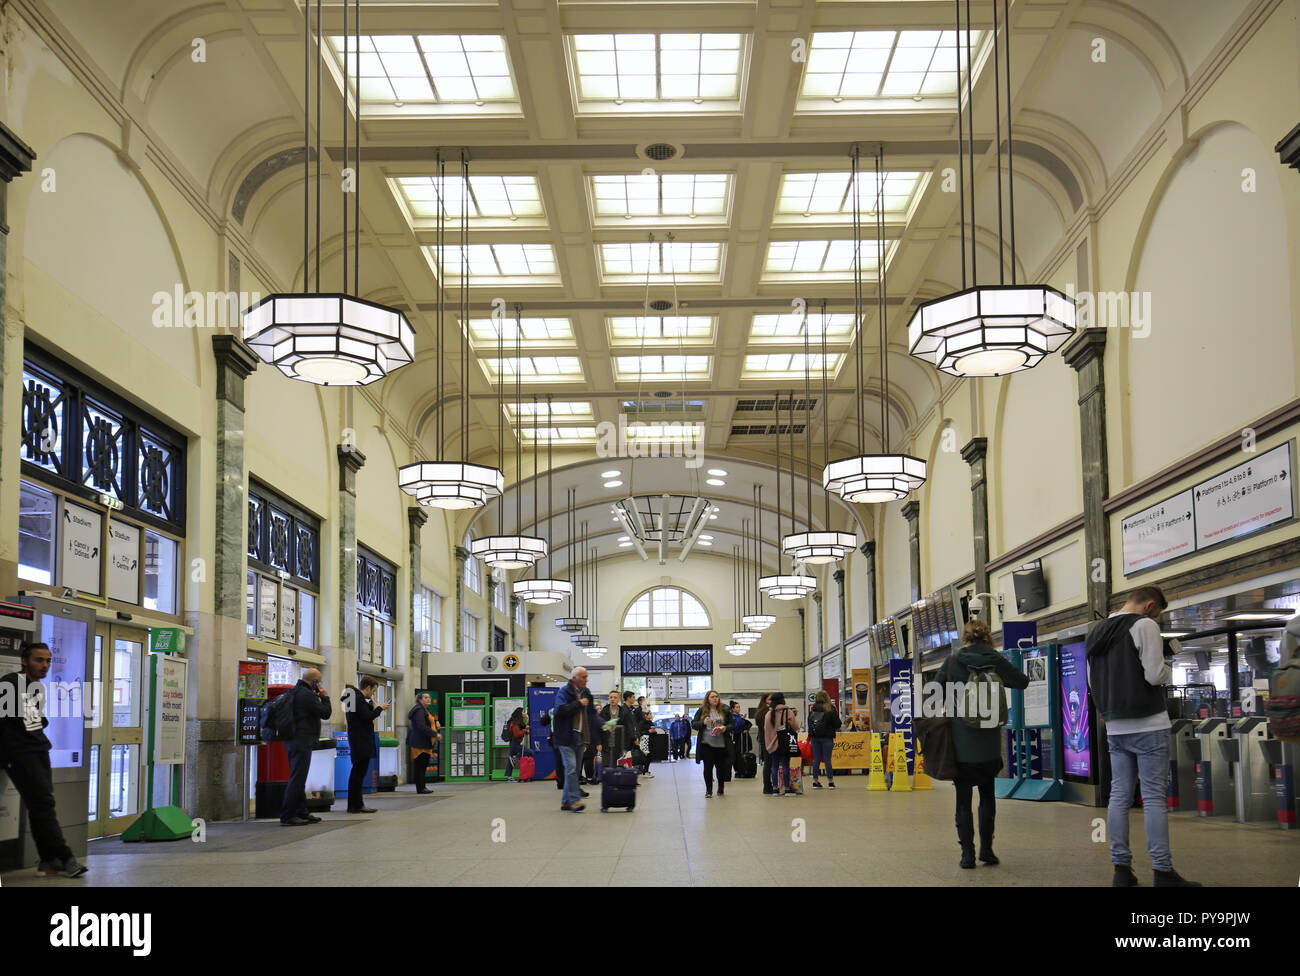 Interior view of Cardiff Railway Station ticket hall, South Wales, UK. Shows original art deco features. Stock Photo